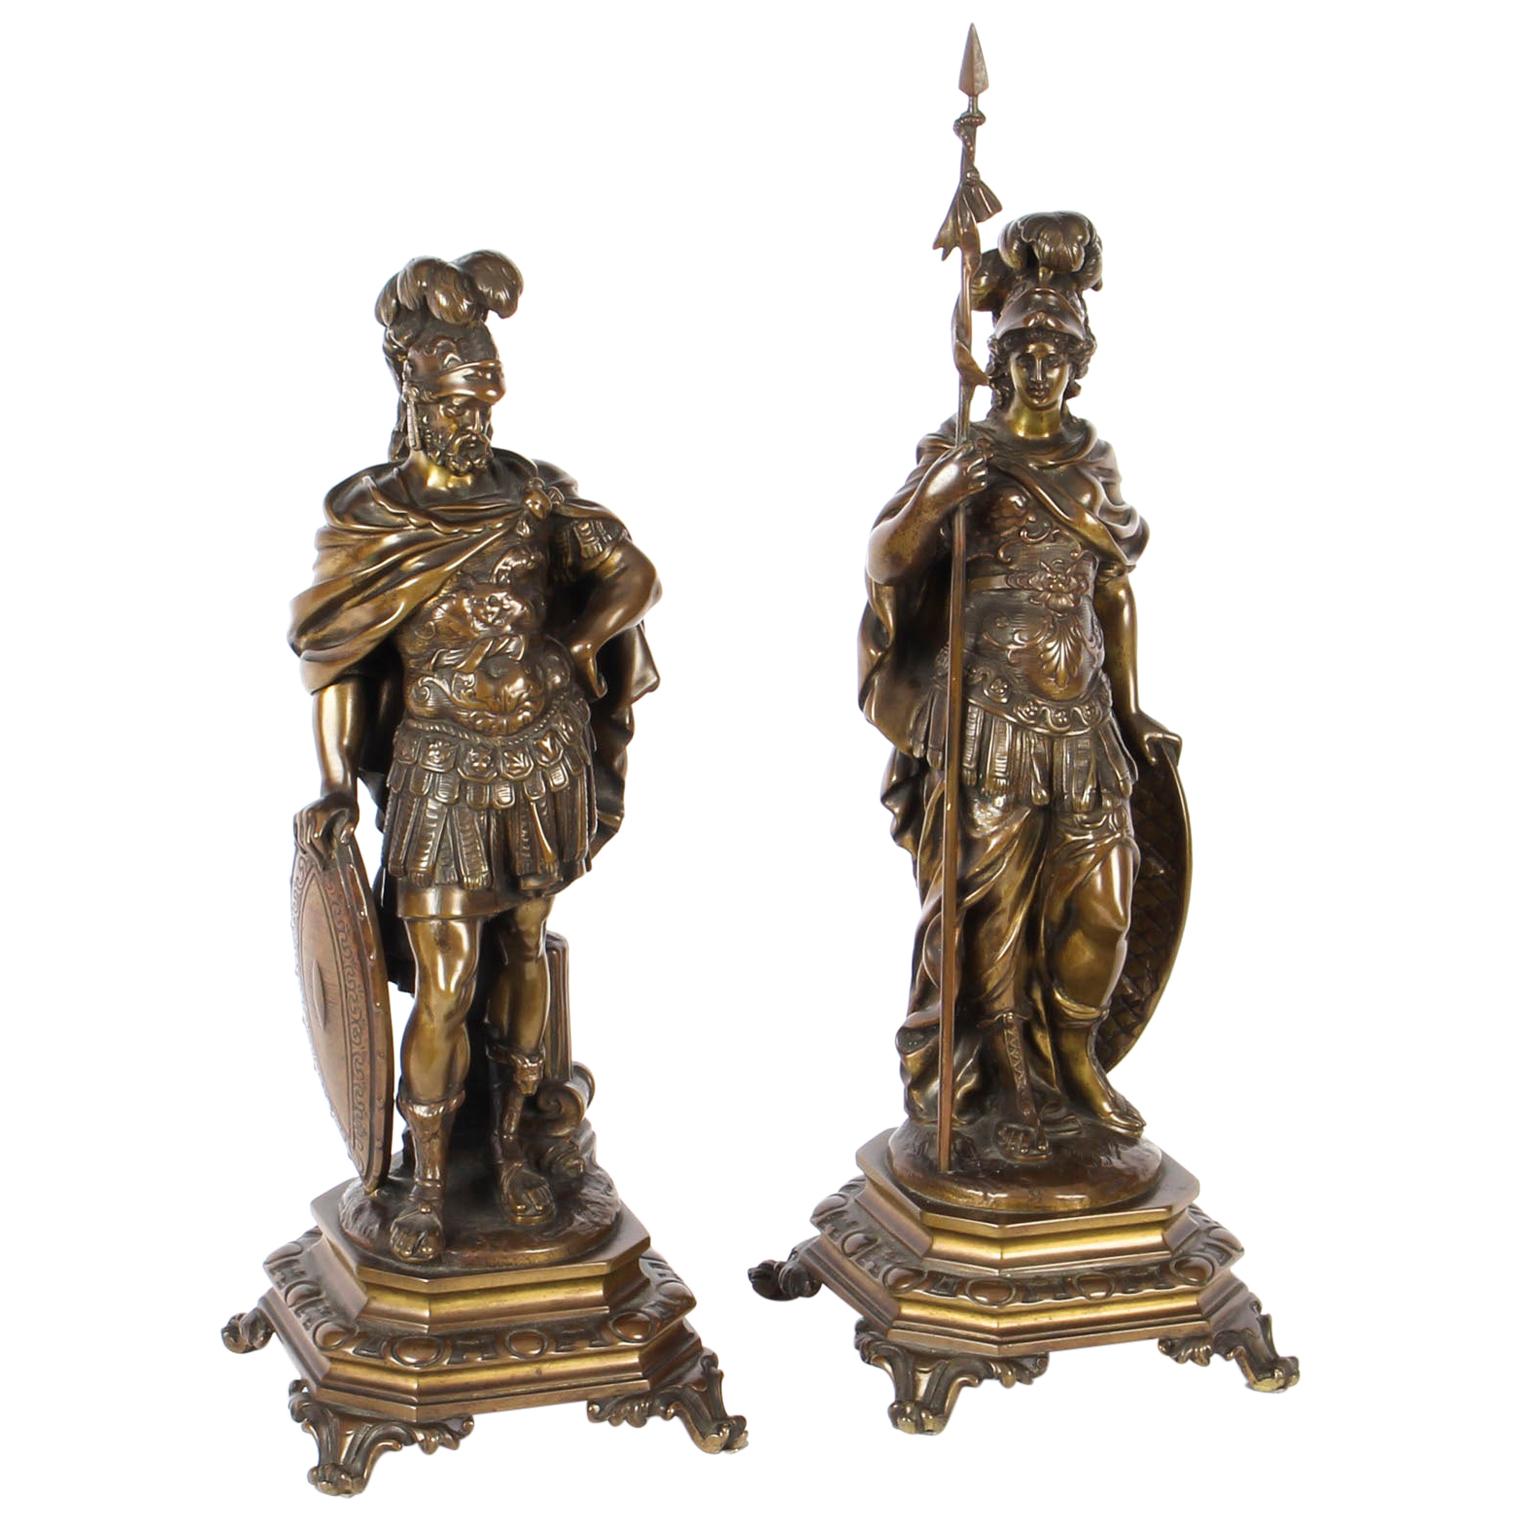 Antique Pair of French Bronzes of Mars and Minerva, 19th Century